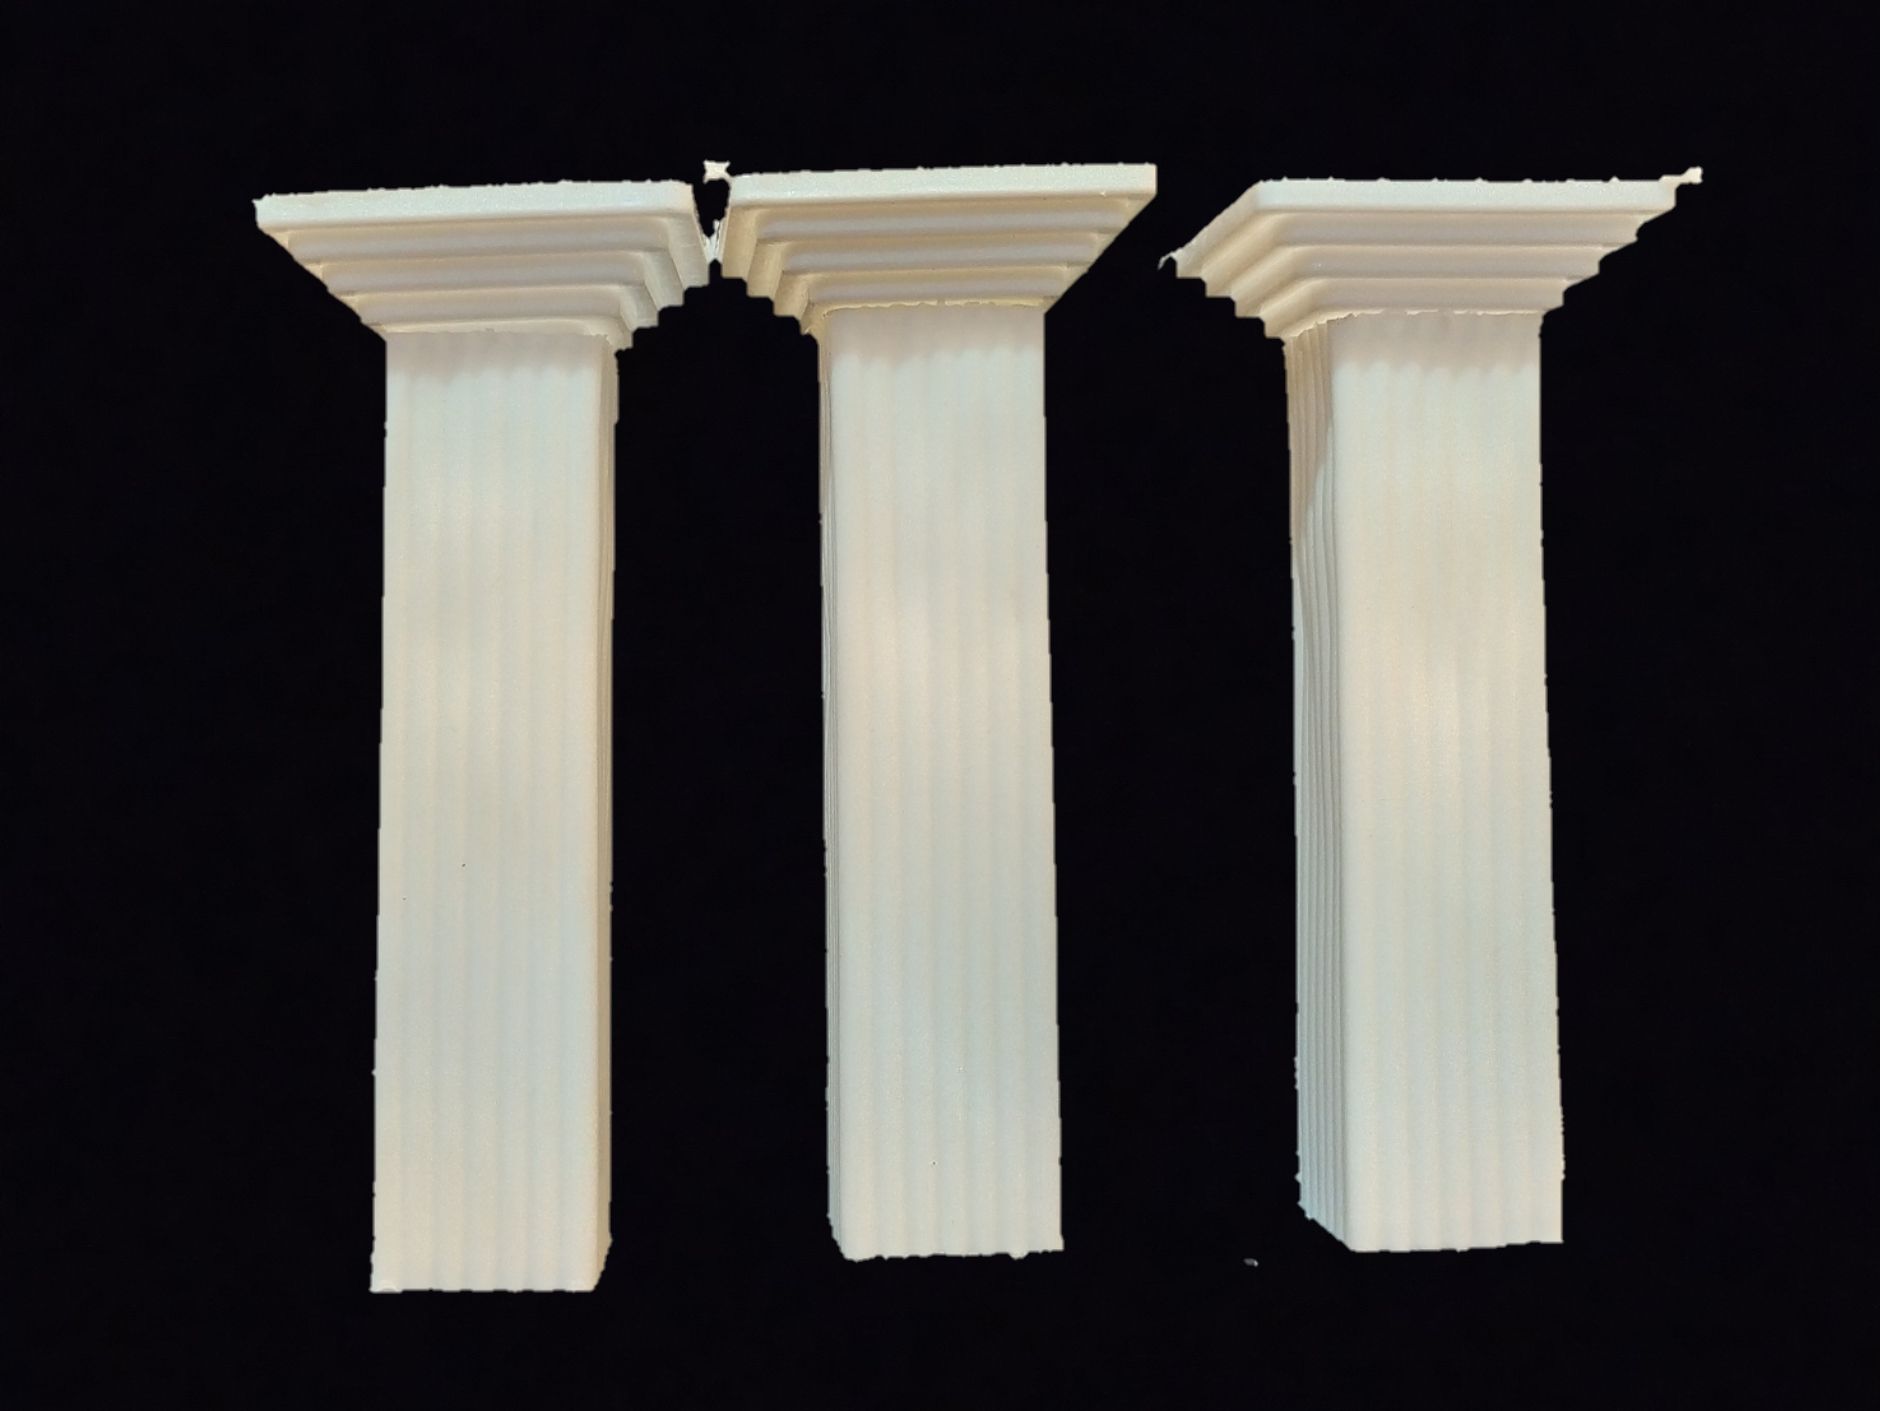 MARKS AND SPENCER 4 White Plaster Cake Pillars With Dowelling Rods Wedding  New £7.00 - PicClick UK